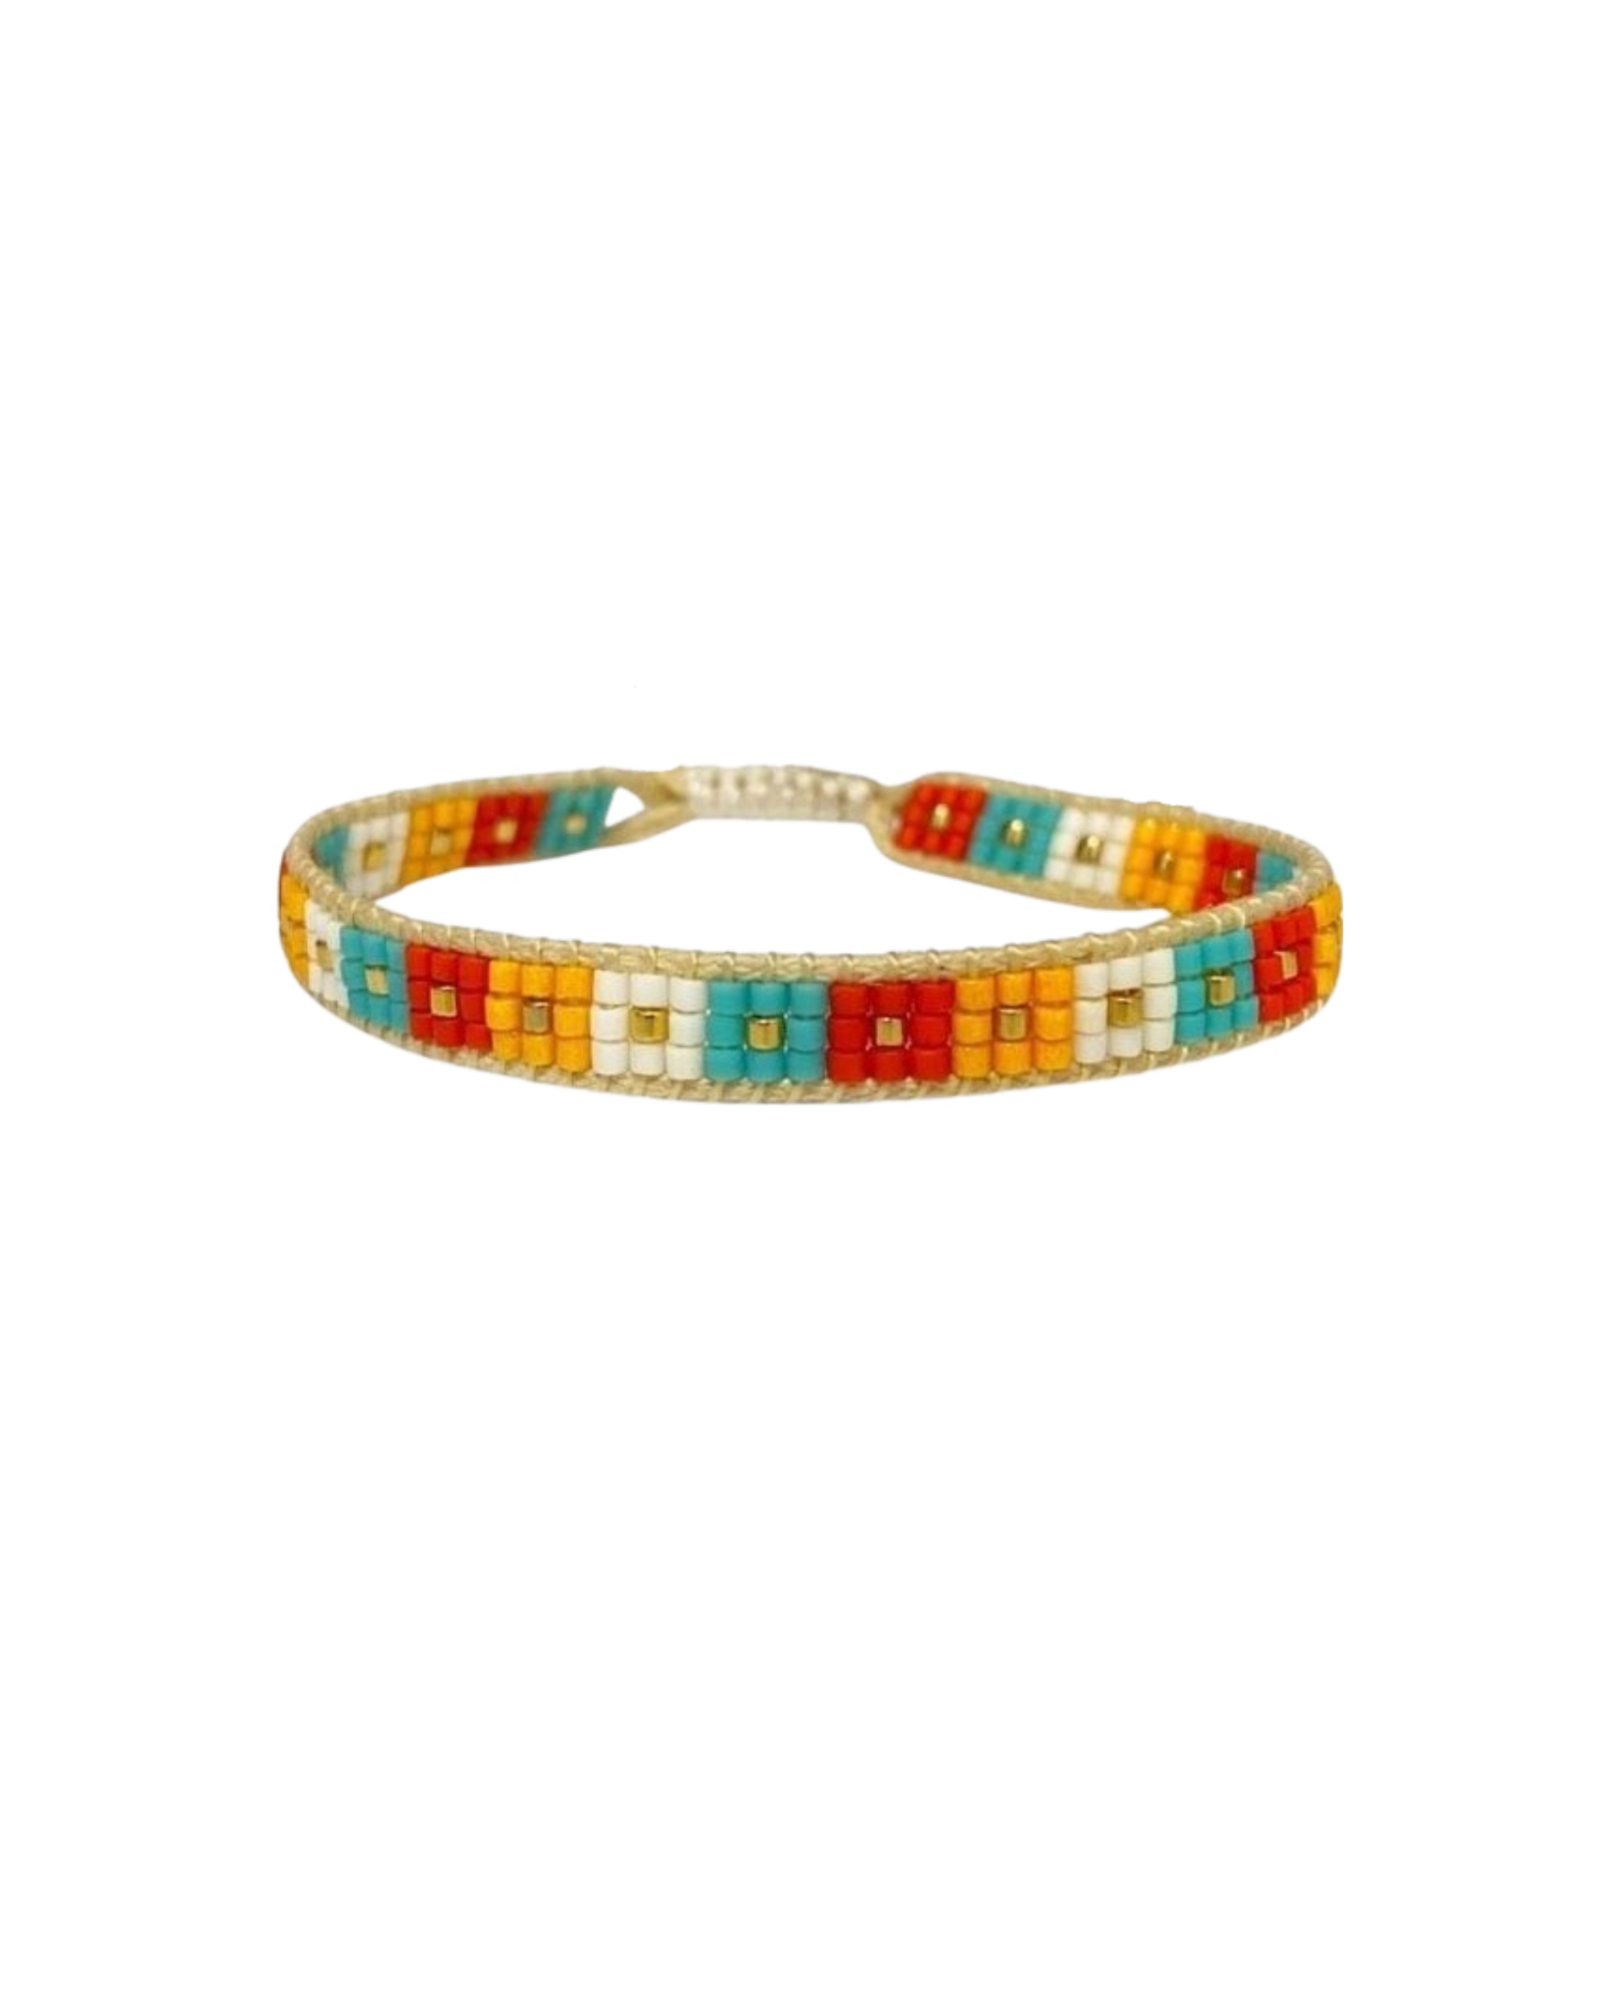 beaded-bracelet with checkered design in bright colors